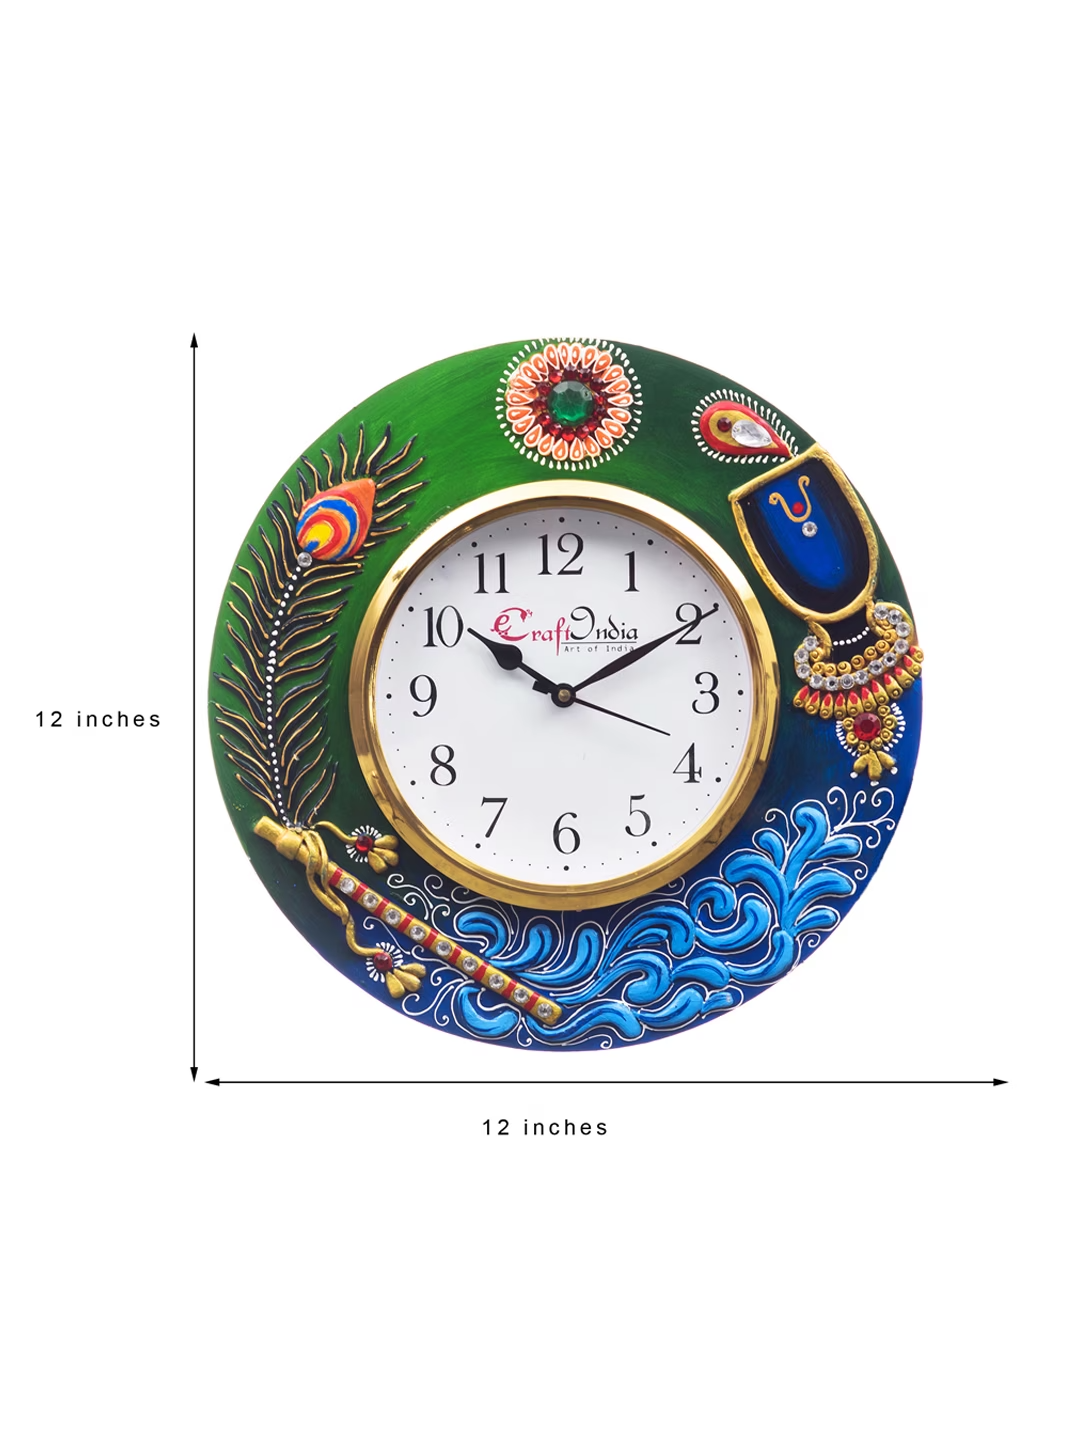 White & Blue Handcrafted Round Embellished Analogue Wall Clock